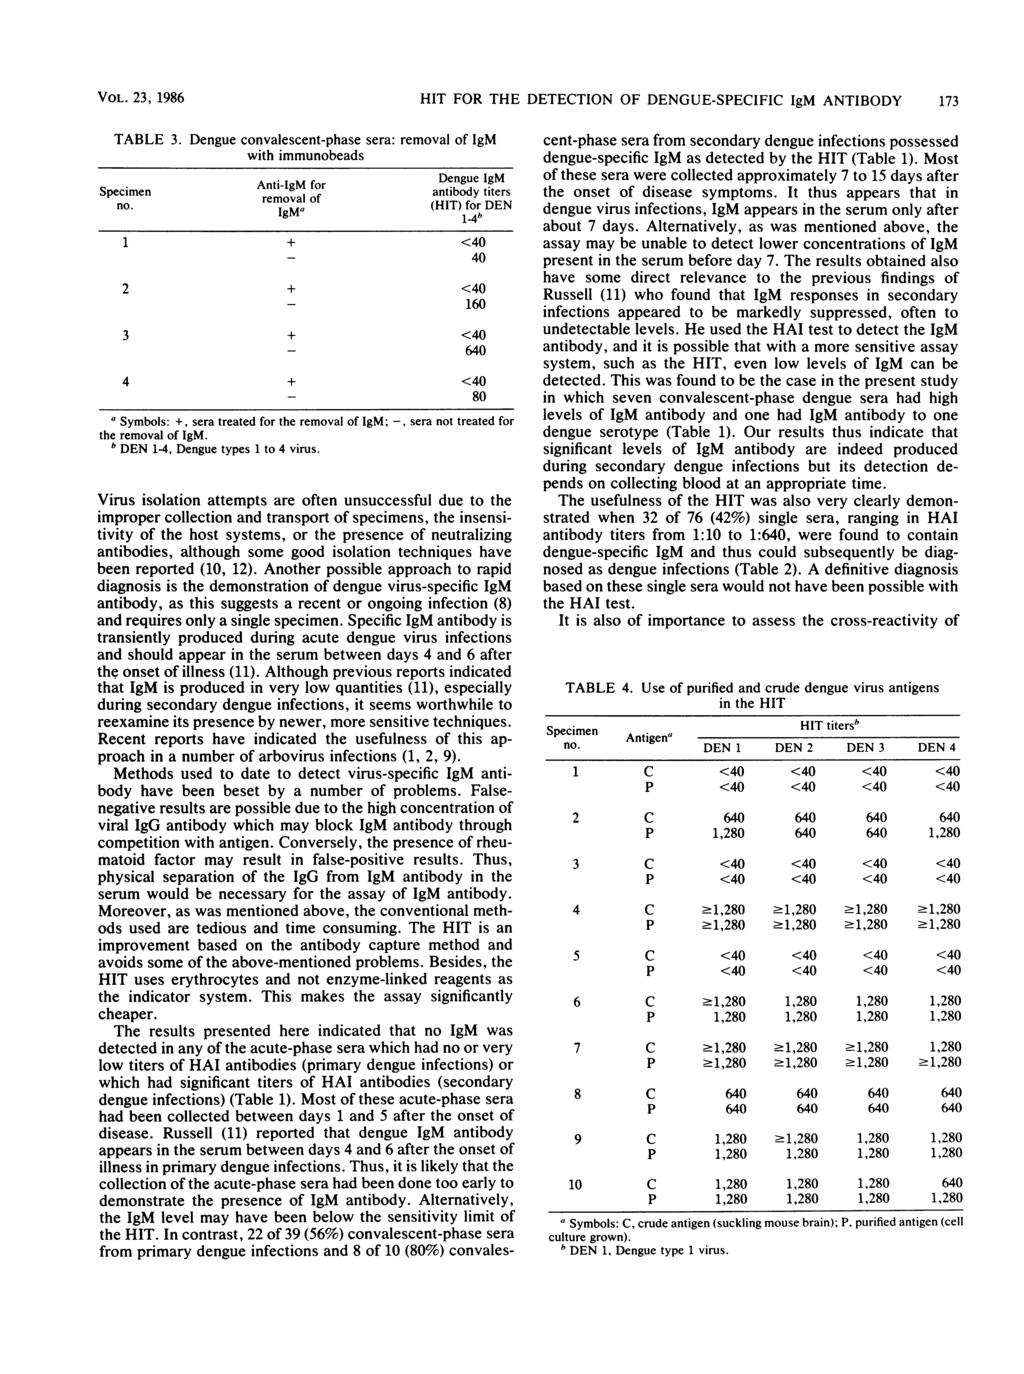 VOL. 23, 1986 HIT FOR THE DETECTION OF DENGUE-SPECIFIC IgM ANTIBODY 173 TABLE 3.